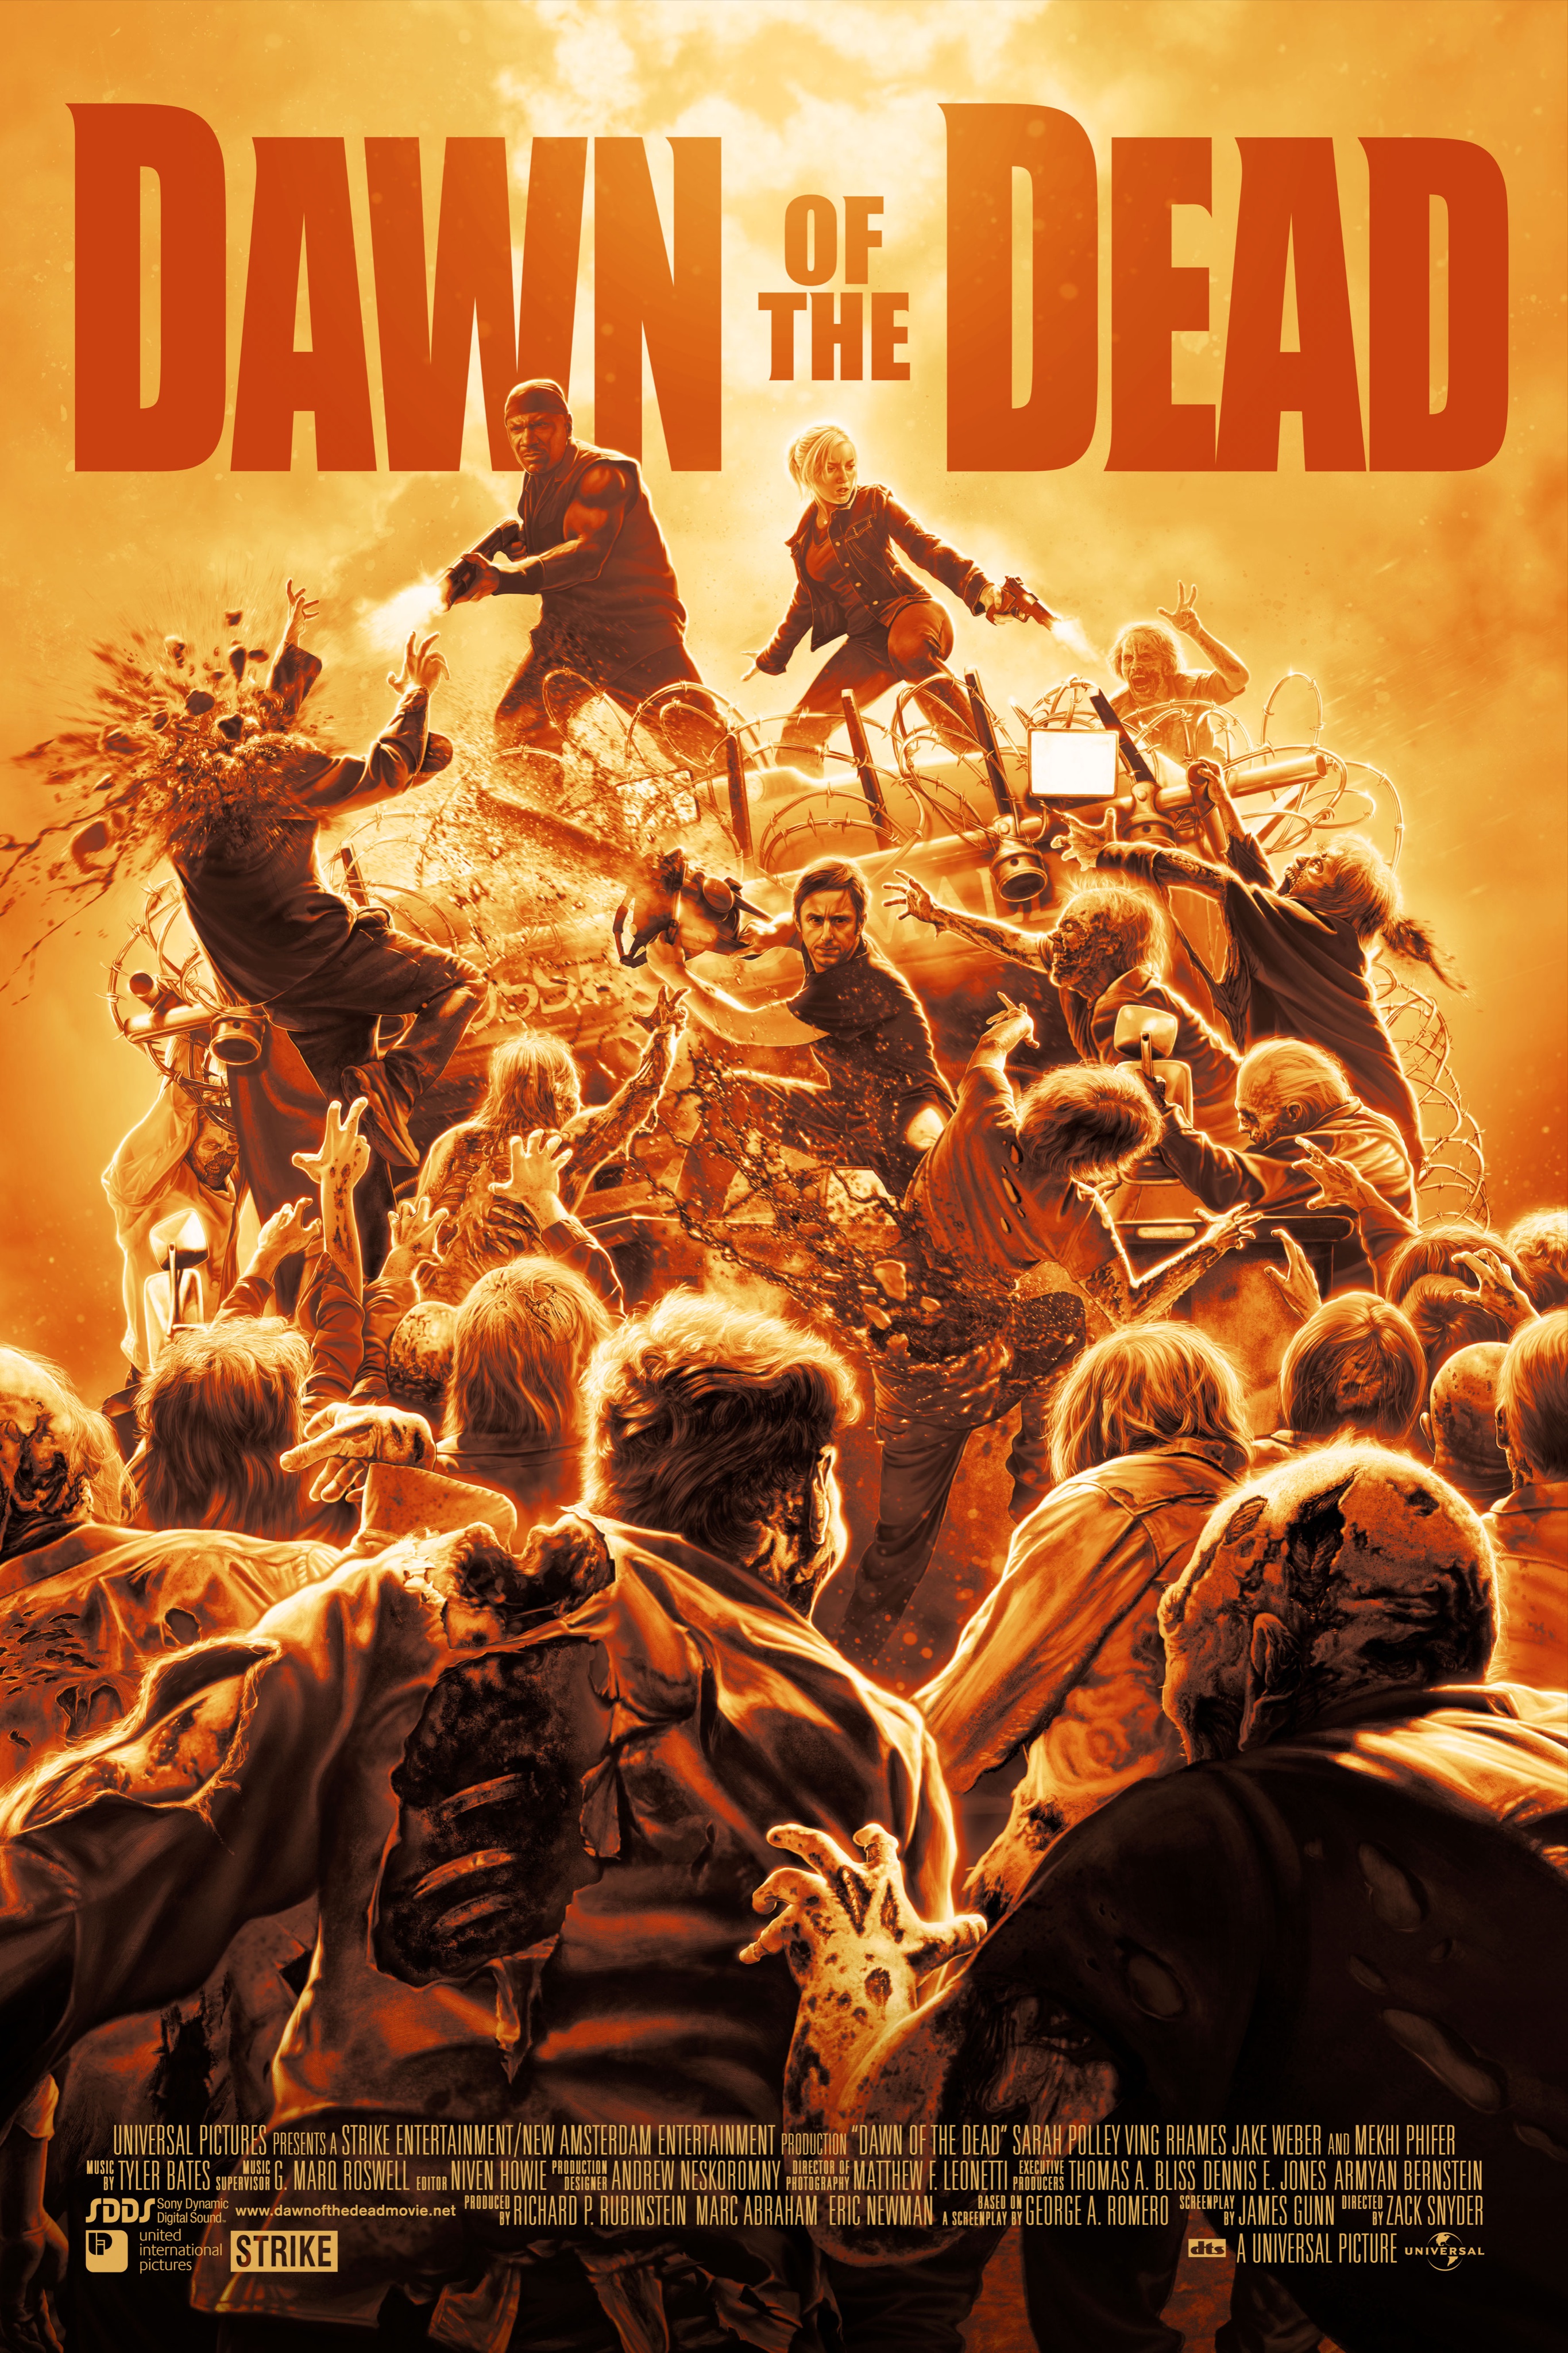 Jack C. Gregory on X: New work! Dawn of the Dead (2004) . A